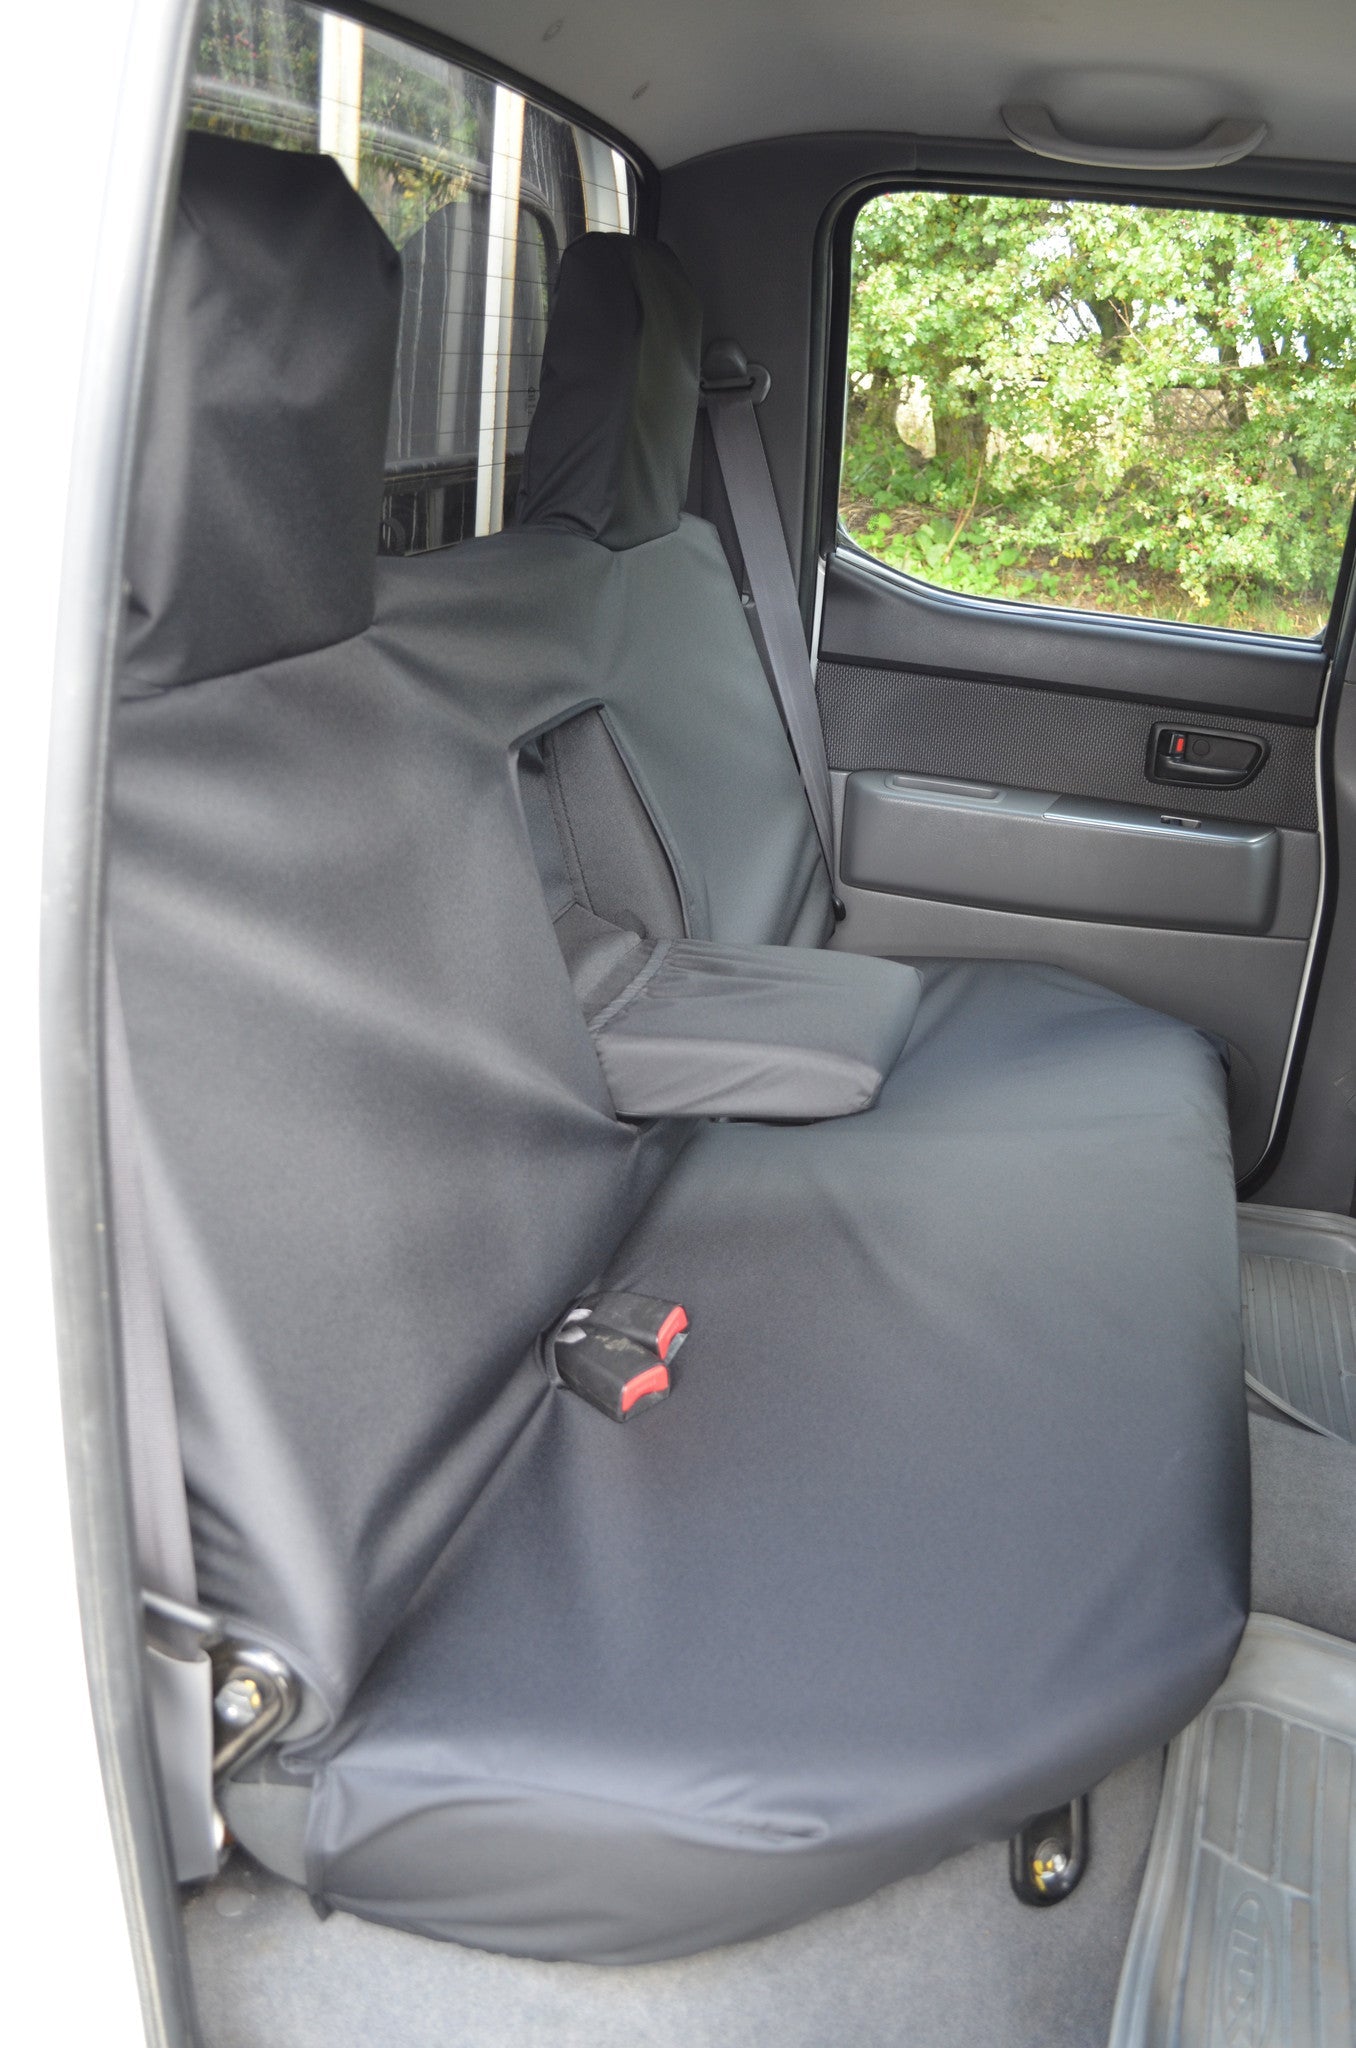 Ford Ranger 2006 to 2012 Seat Covers Rear Seat Cover / Black Scutes Ltd